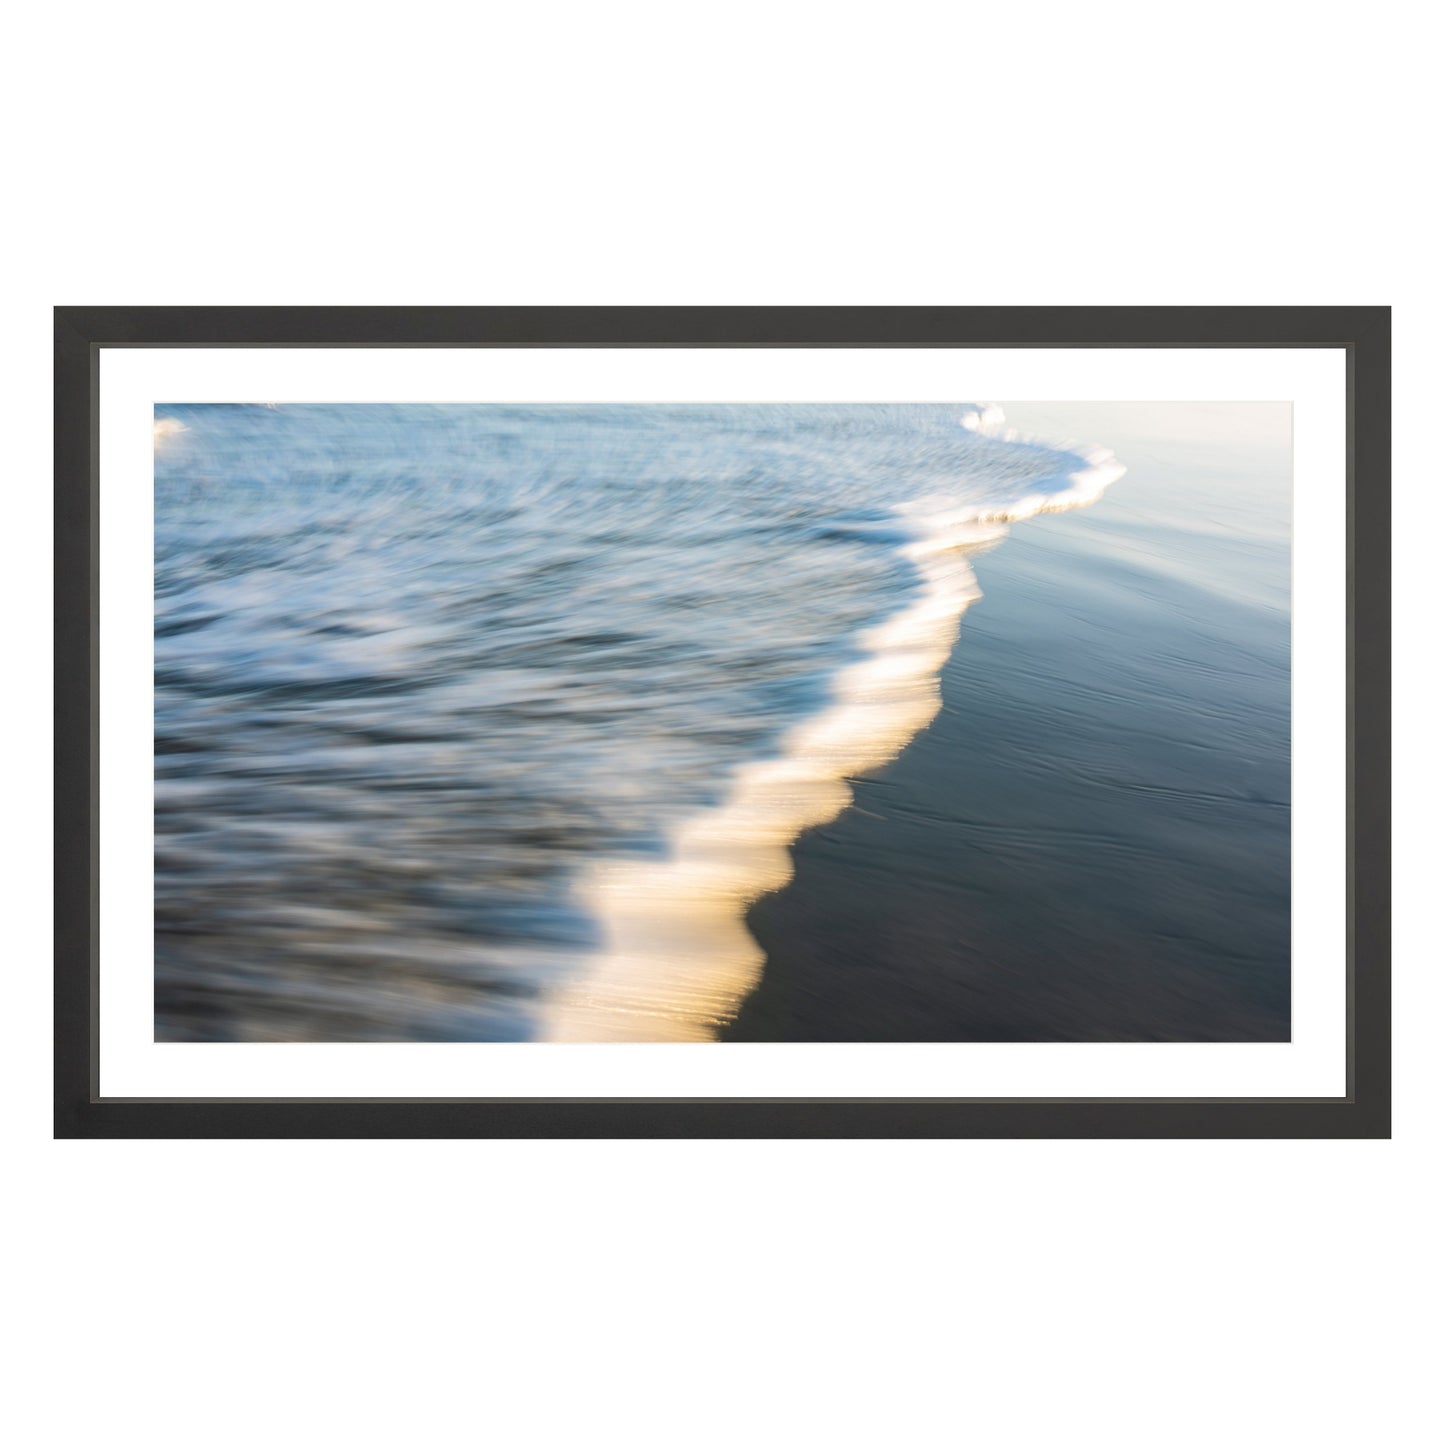 Photograph of wave at Atlantic Ocean framed in black with white mat